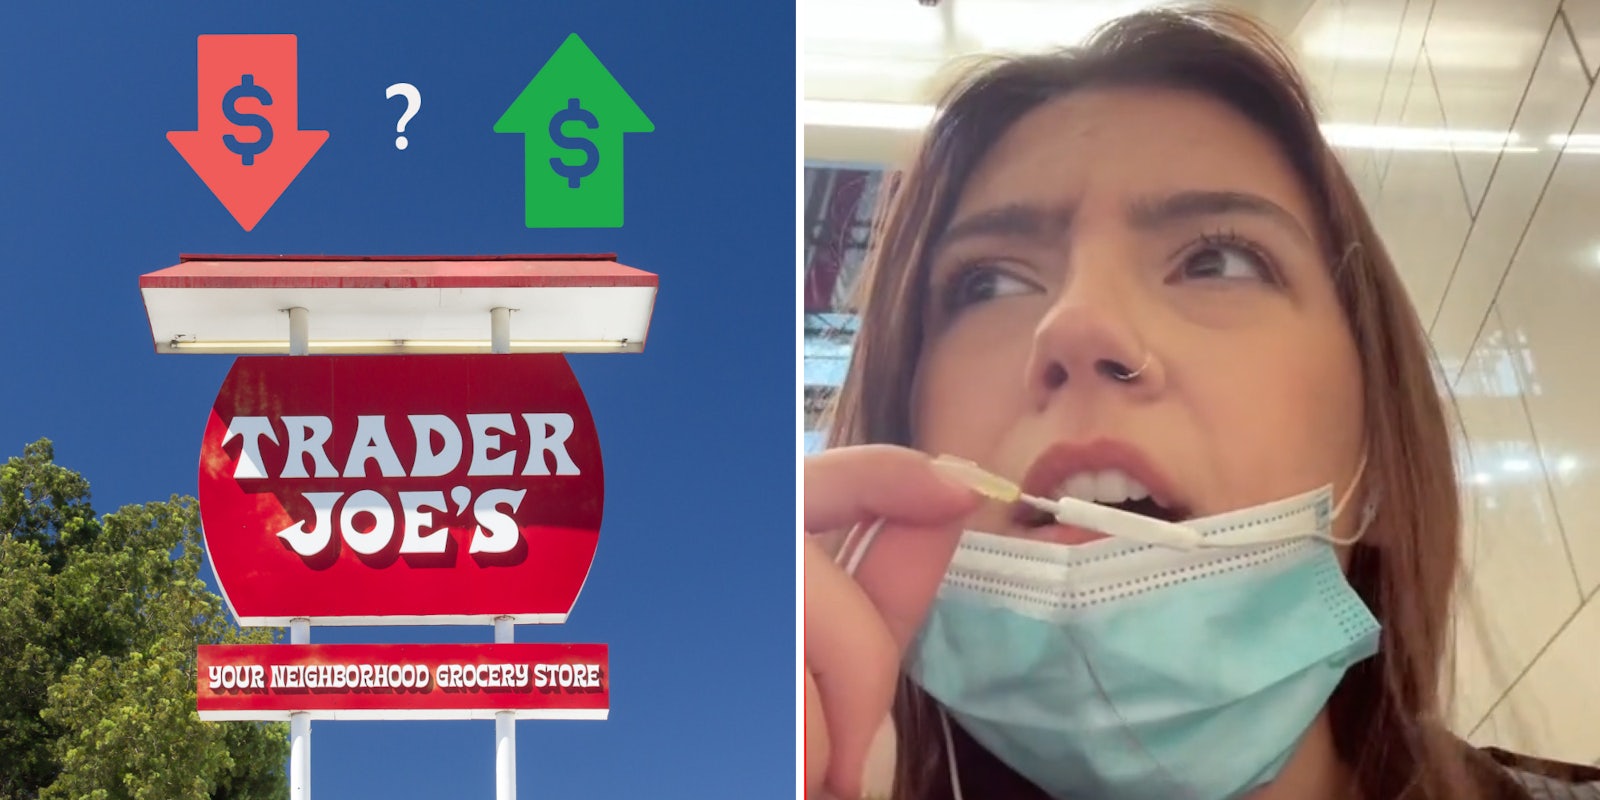 Trader Joe's sign with red money arrow pointing down above, then question mark, then green money arrow pointing up with blue skies behind (l) Woman speaking into earbuds microphone (r)